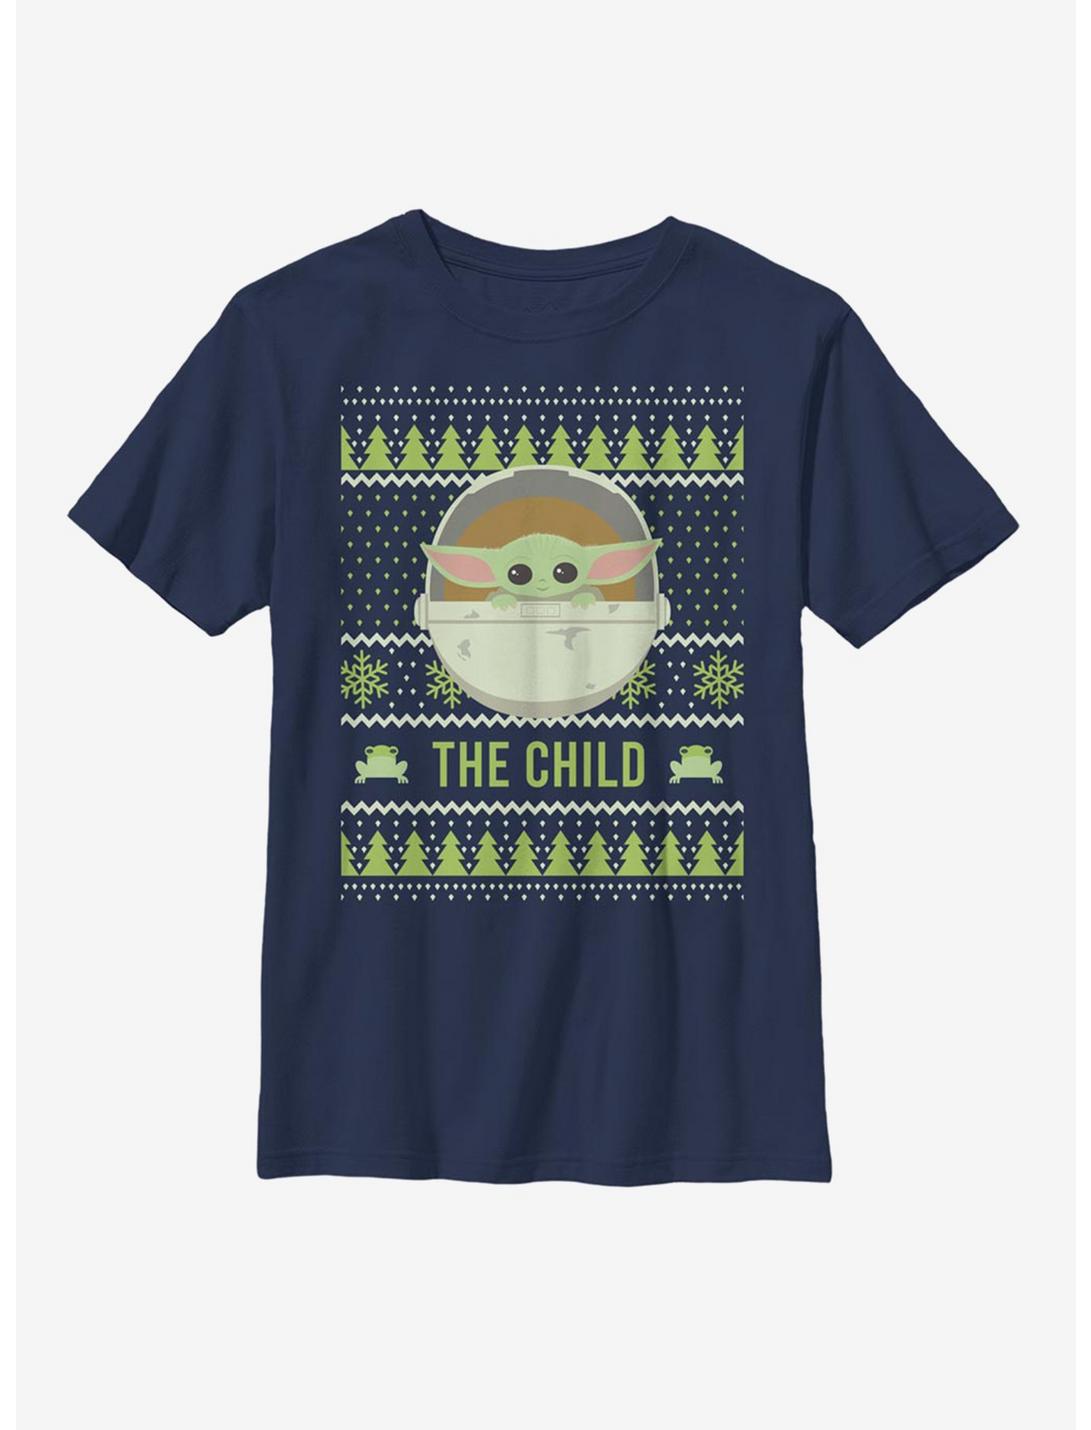 Star Wars The Mandalorian The Child Cute Holiday Pattern Youth T-Shirt, NAVY, hi-res